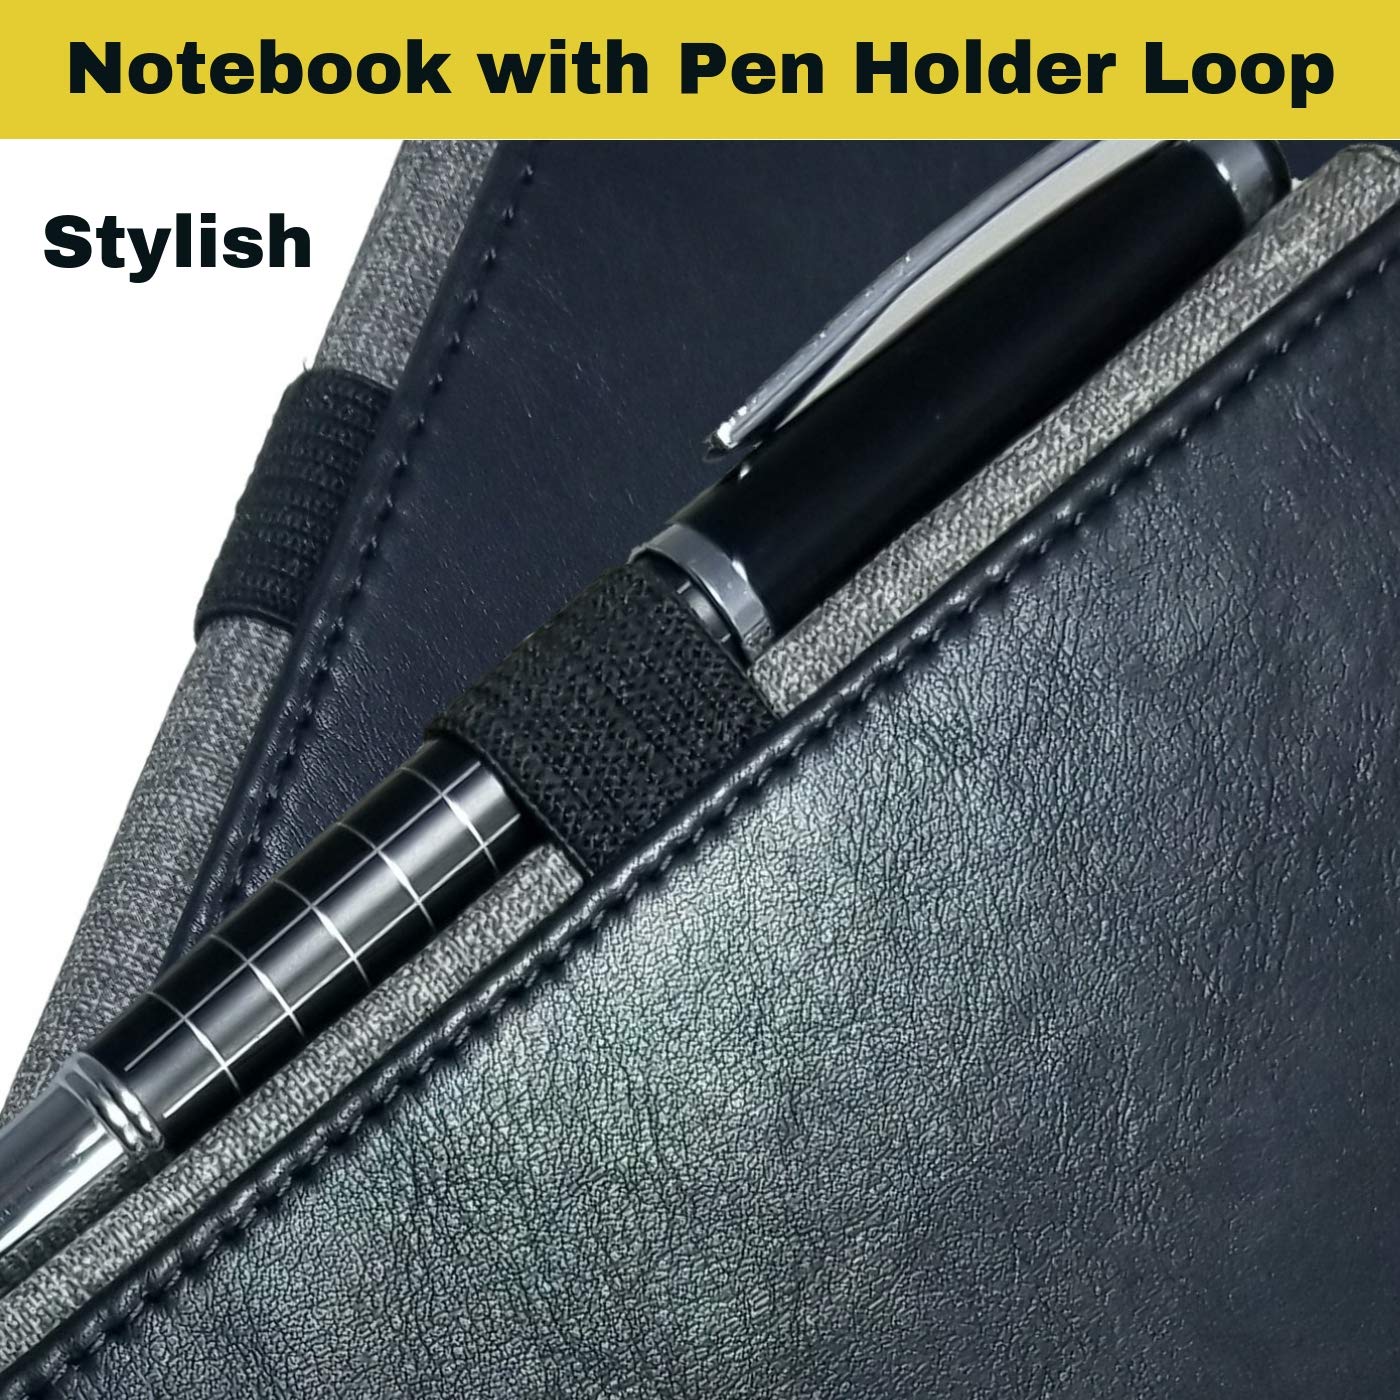 Notebook with Pen Holder Loop - Meeting Notebook - Dotted Grid Leather Bound Journal - Black - Great for Writing, Journaling & Sketching – Bullet Journals to Write in for Women, Men, Business